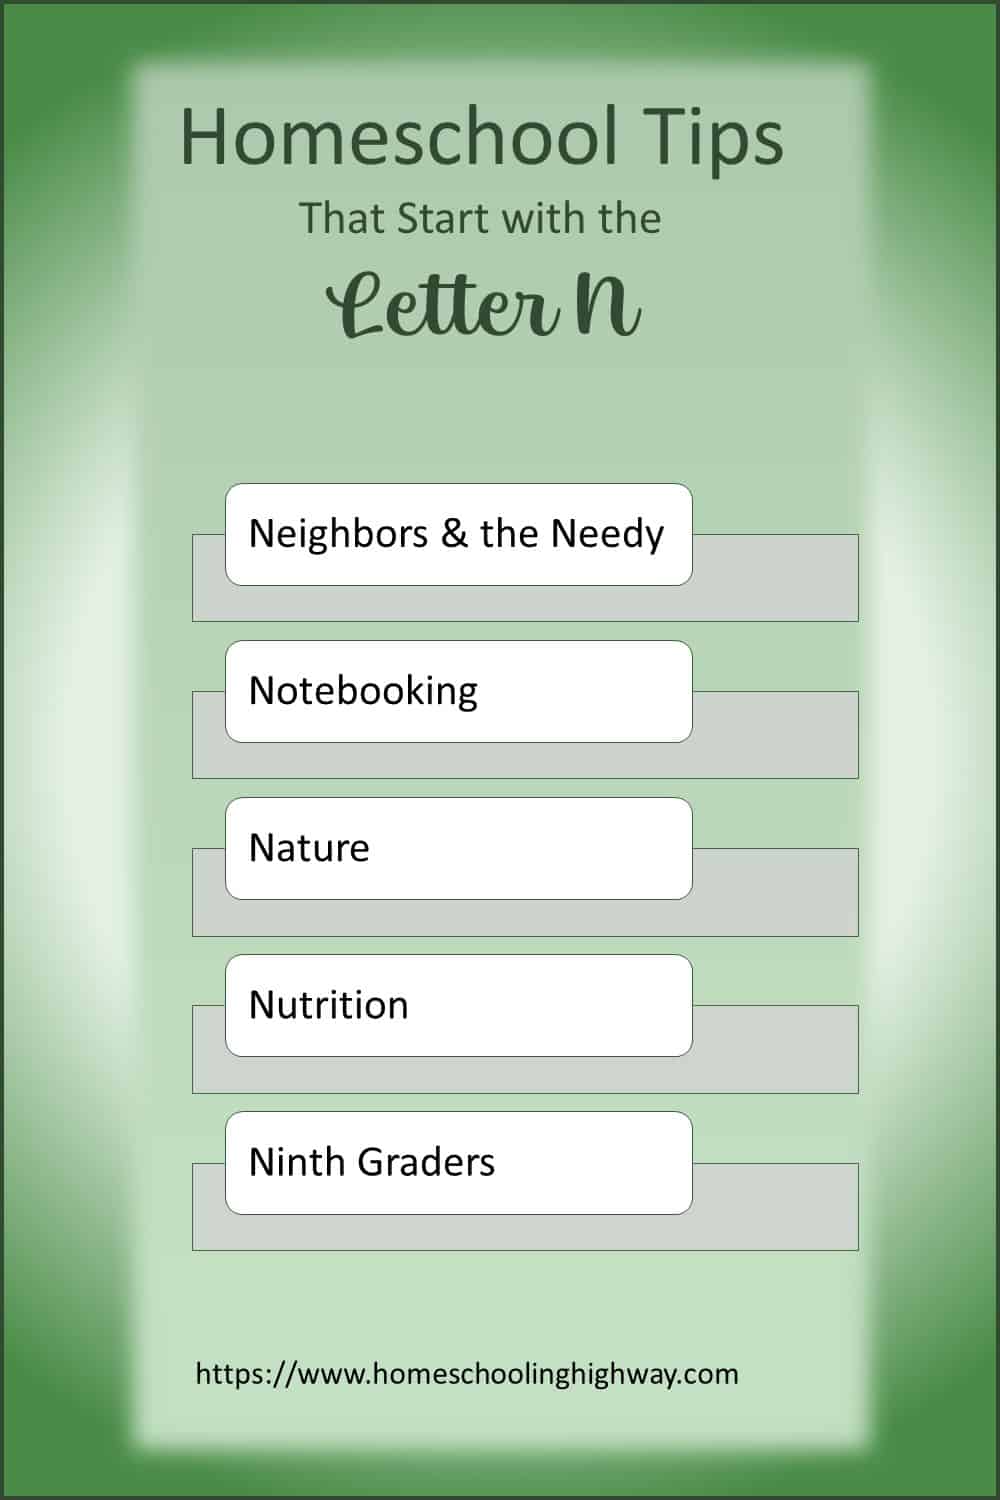 Homeschooling Tips That Start With N. Neighbors and the Needy, Notebooking, Nature, Nutrition, Ninth Graders